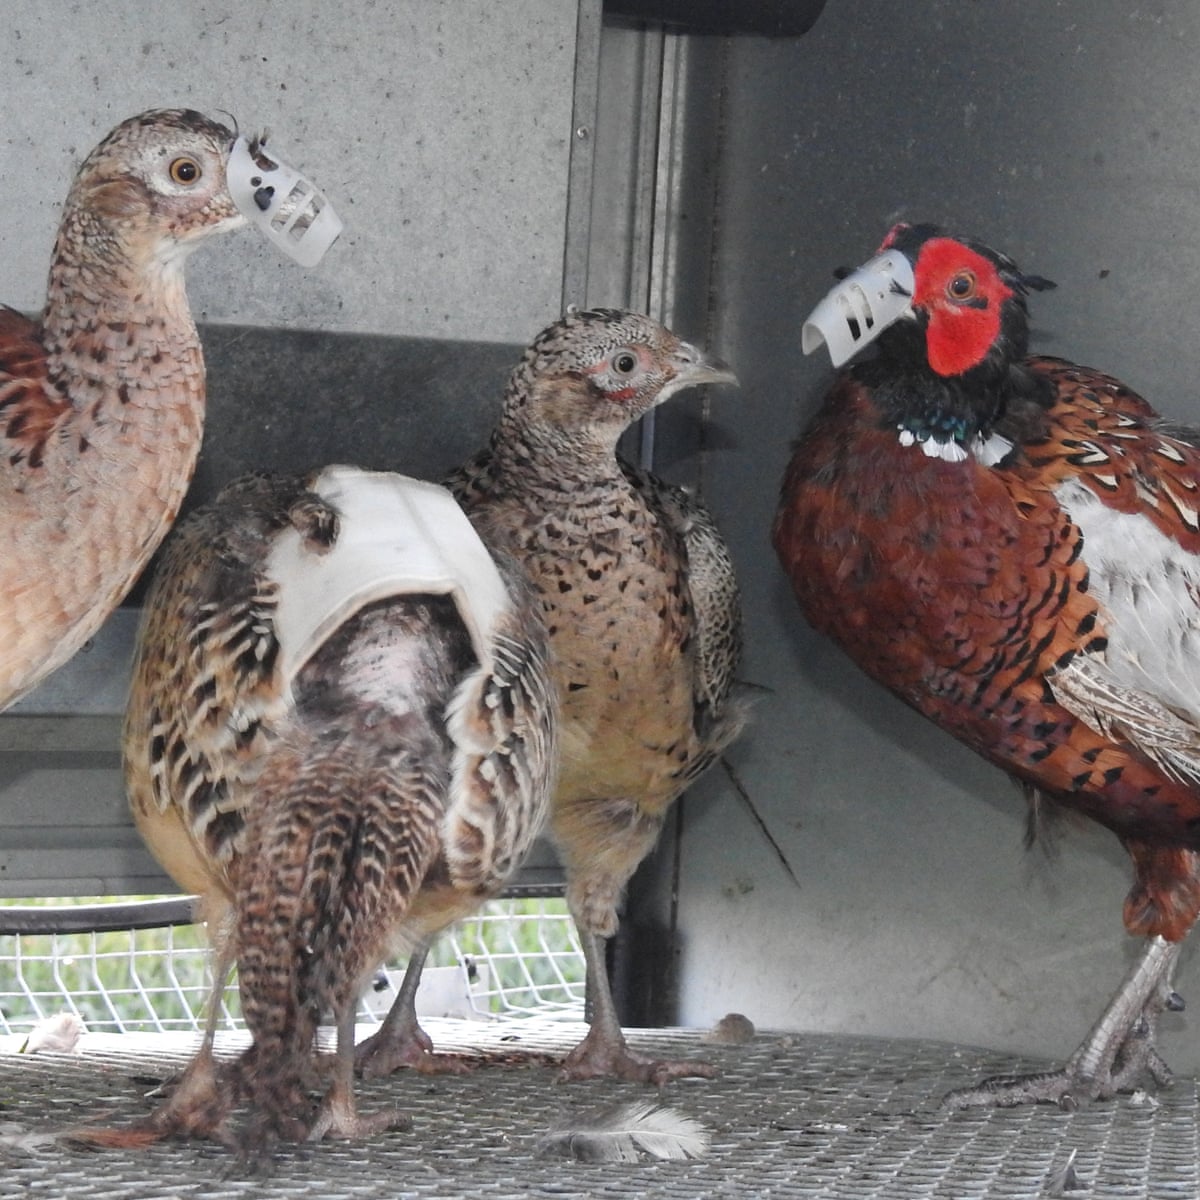 Game birds subject to 'cruel' conditions, undercover footage shows |  Environment | The Guardian